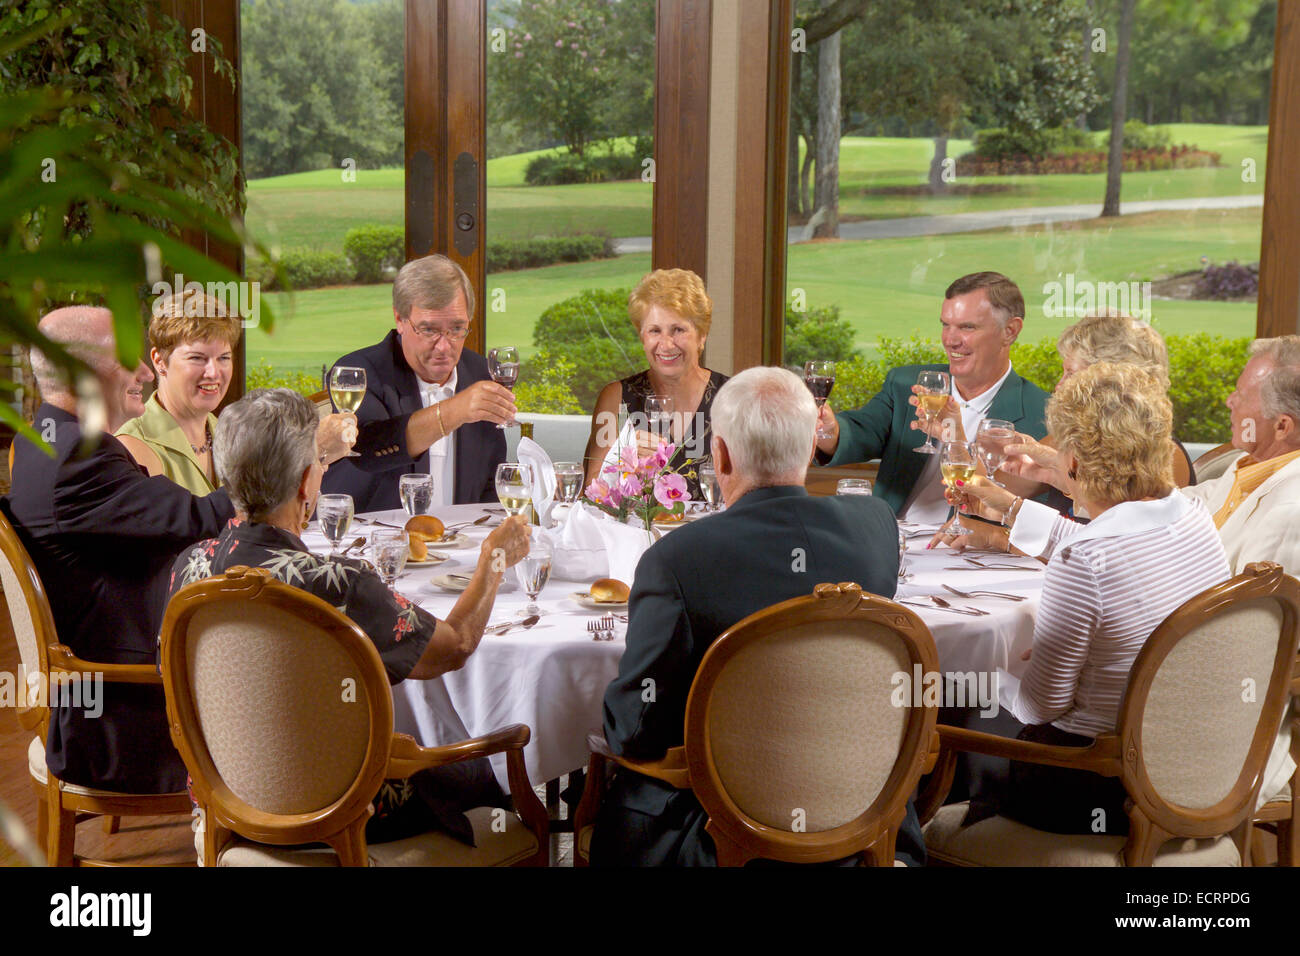 Group of senior citizens dining at country club. Stock Photo